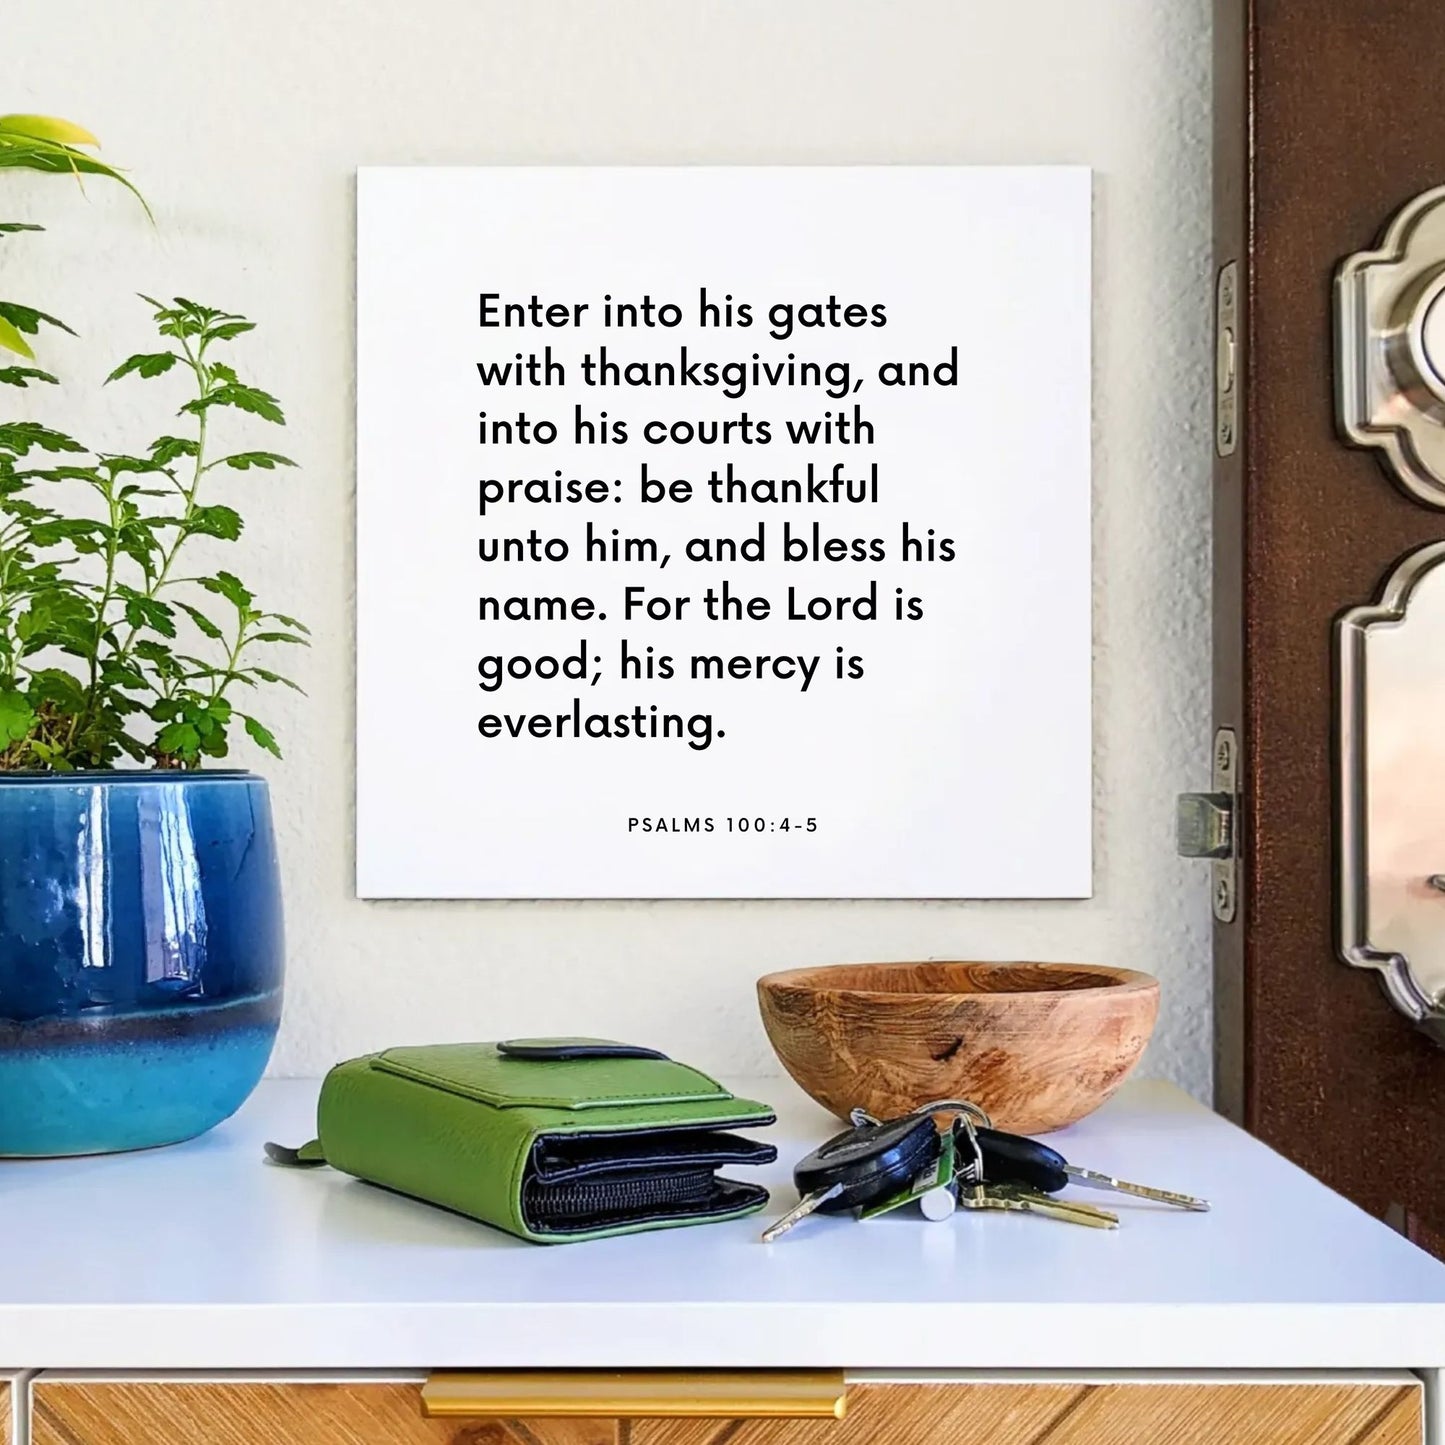 Entryway mouting of the scripture tile for Psalms 100:4-5 - "Be thankful unto him and bless his name, for the Lord is good"